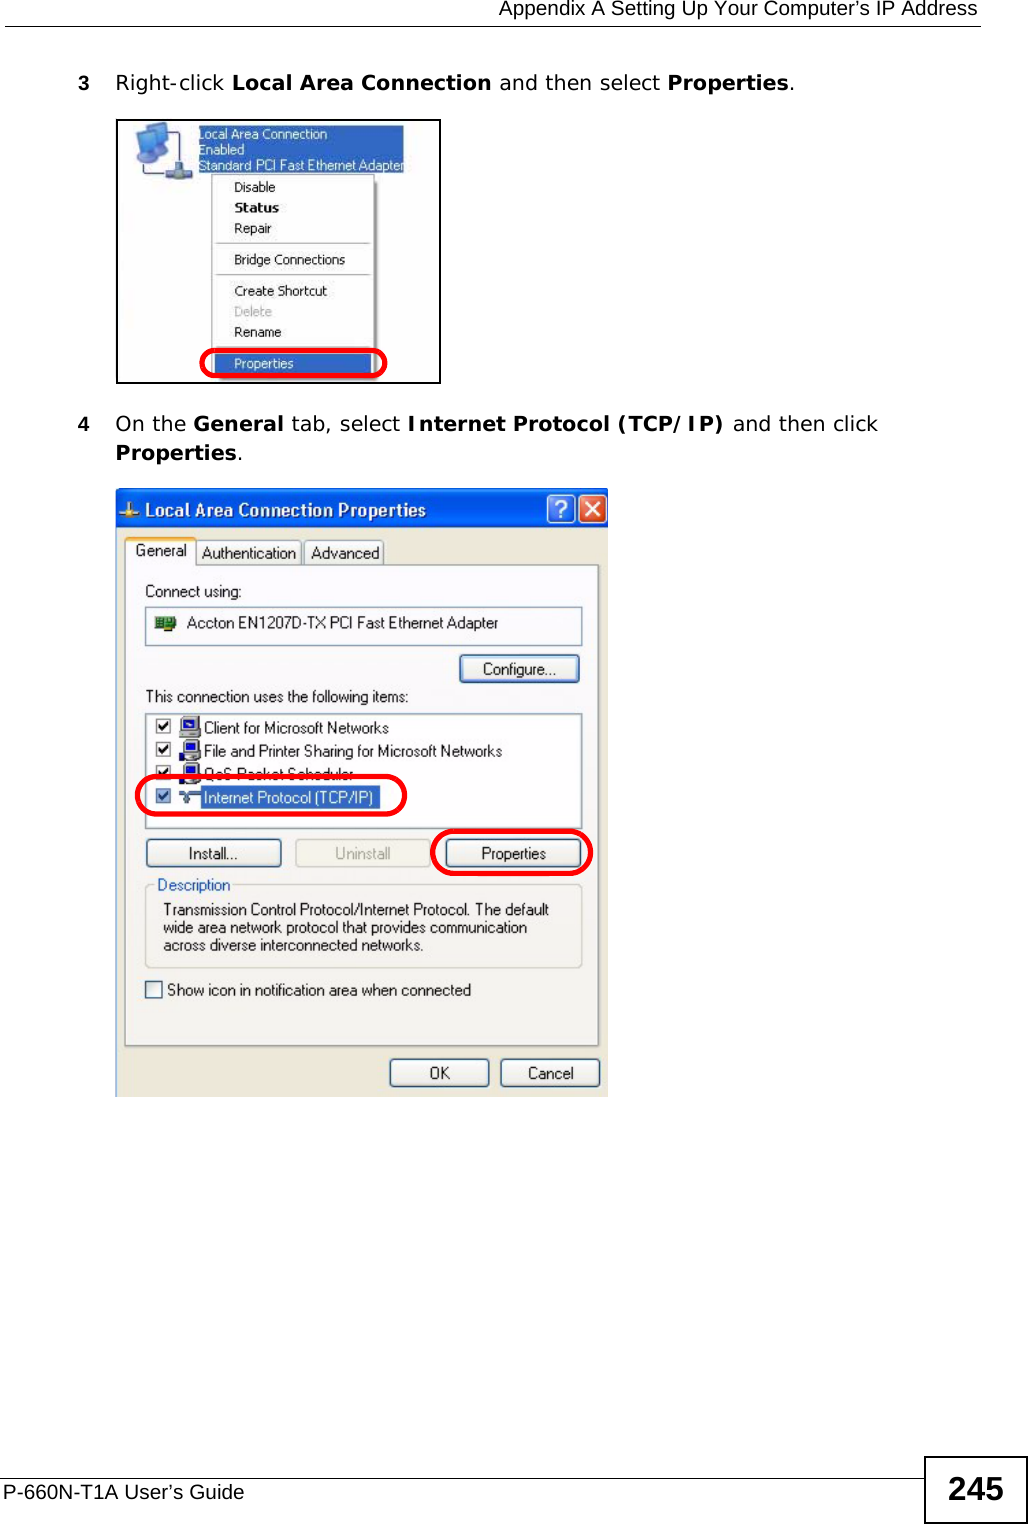  Appendix A Setting Up Your Computer’s IP AddressP-660N-T1A User’s Guide 2453Right-click Local Area Connection and then select Properties.4On the General tab, select Internet Protocol (TCP/IP) and then click Properties.